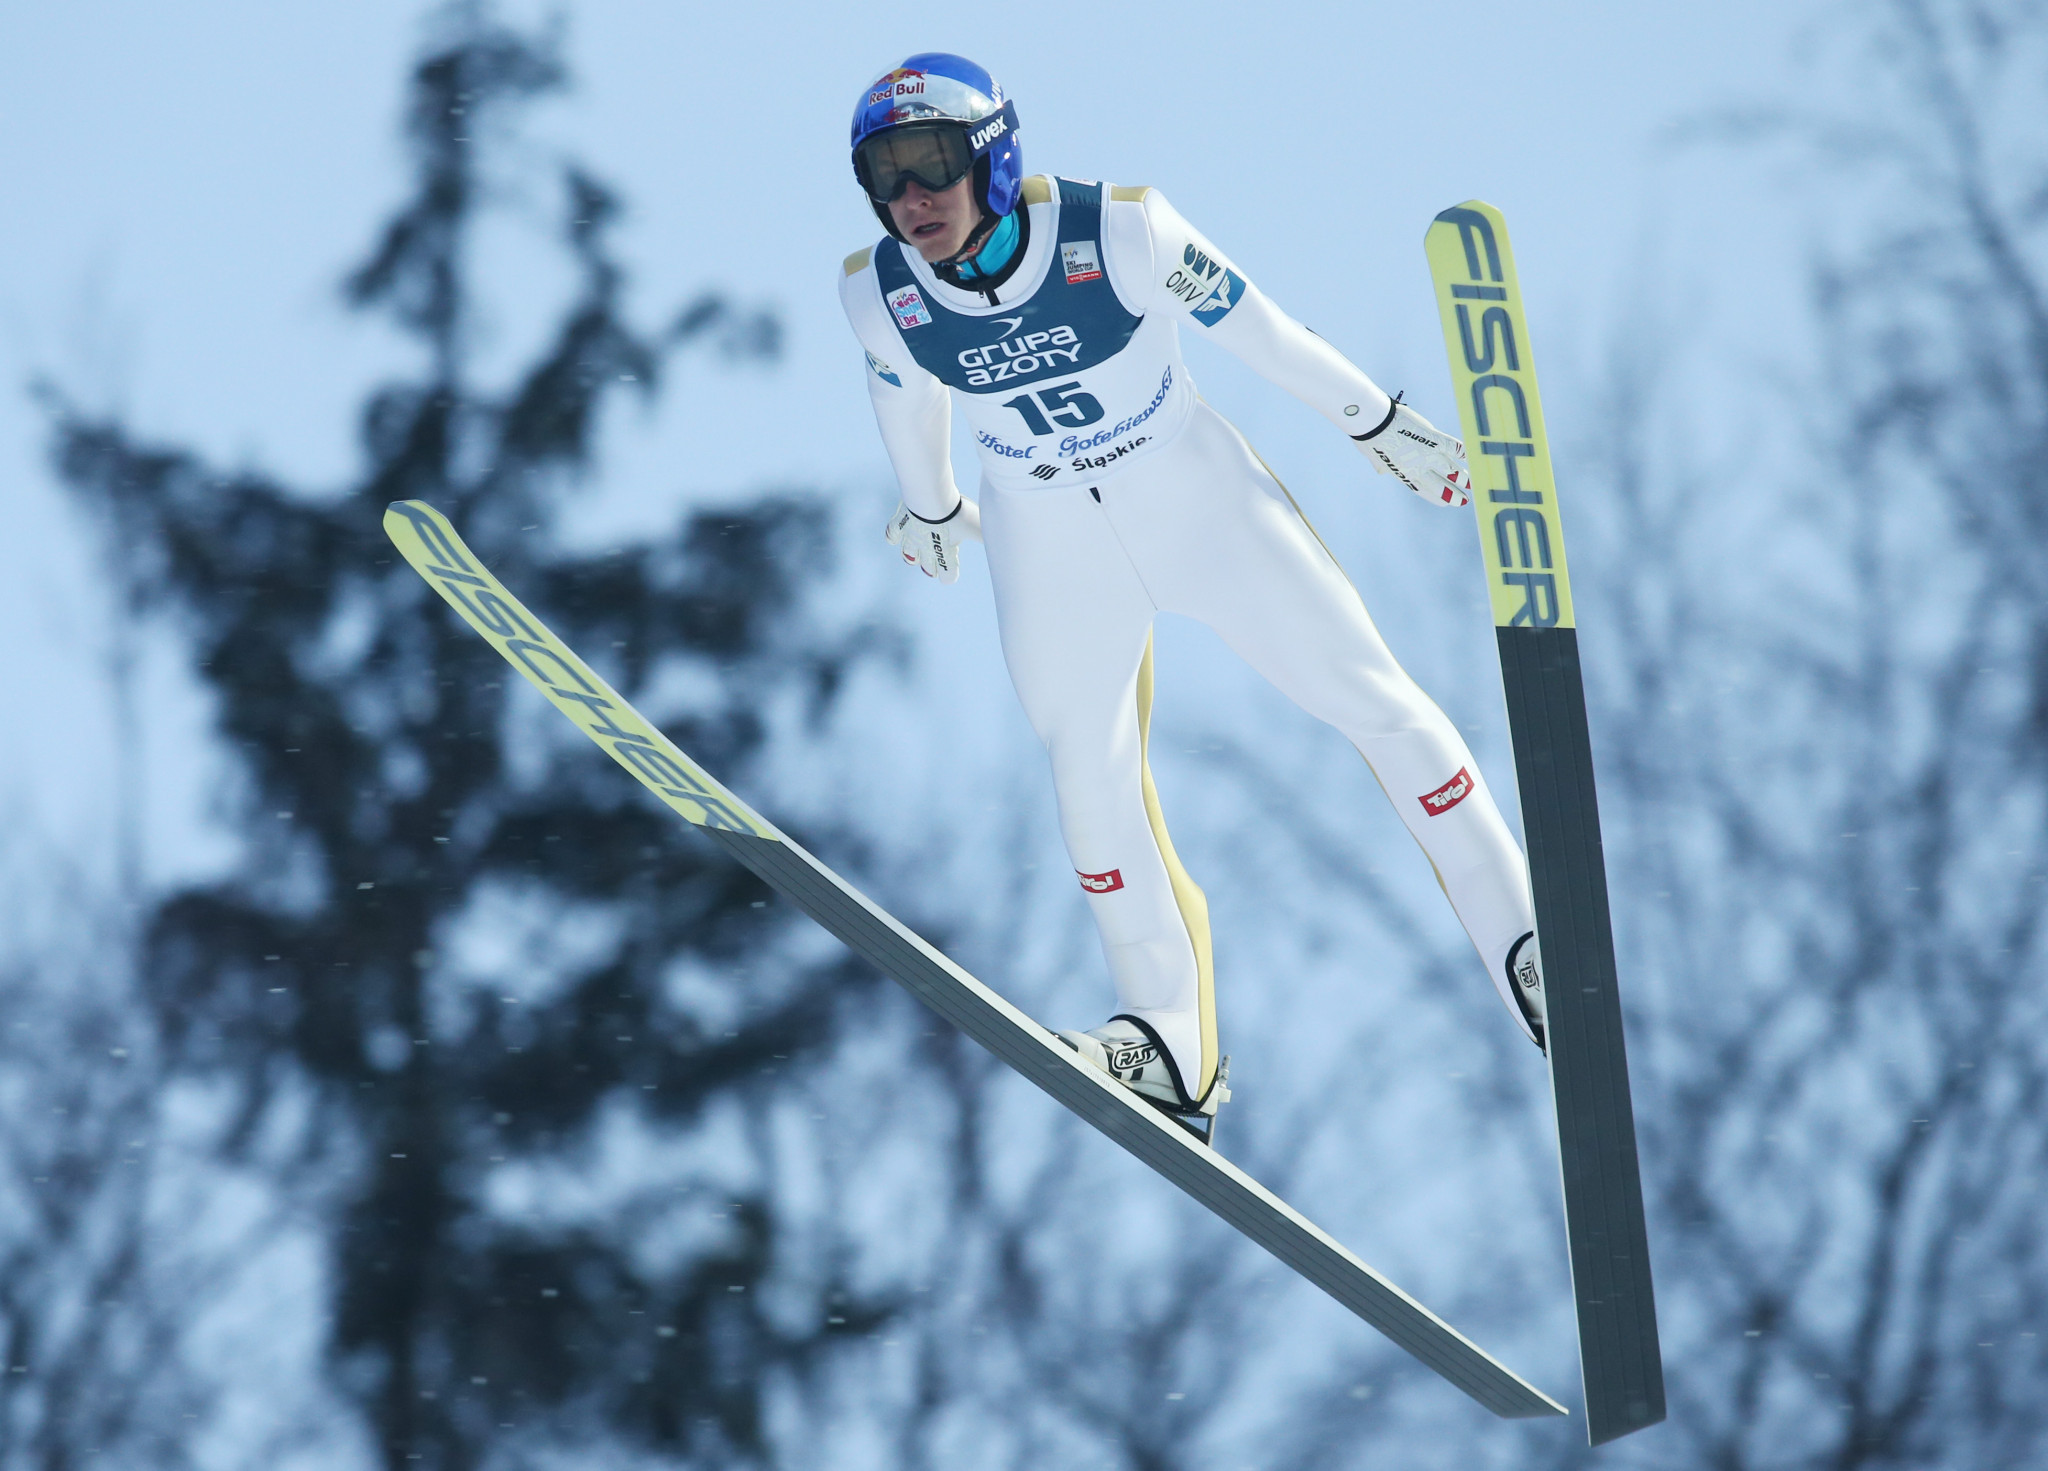 The ski jumping World Cup season will begin in Wisla next month ©Getty Images